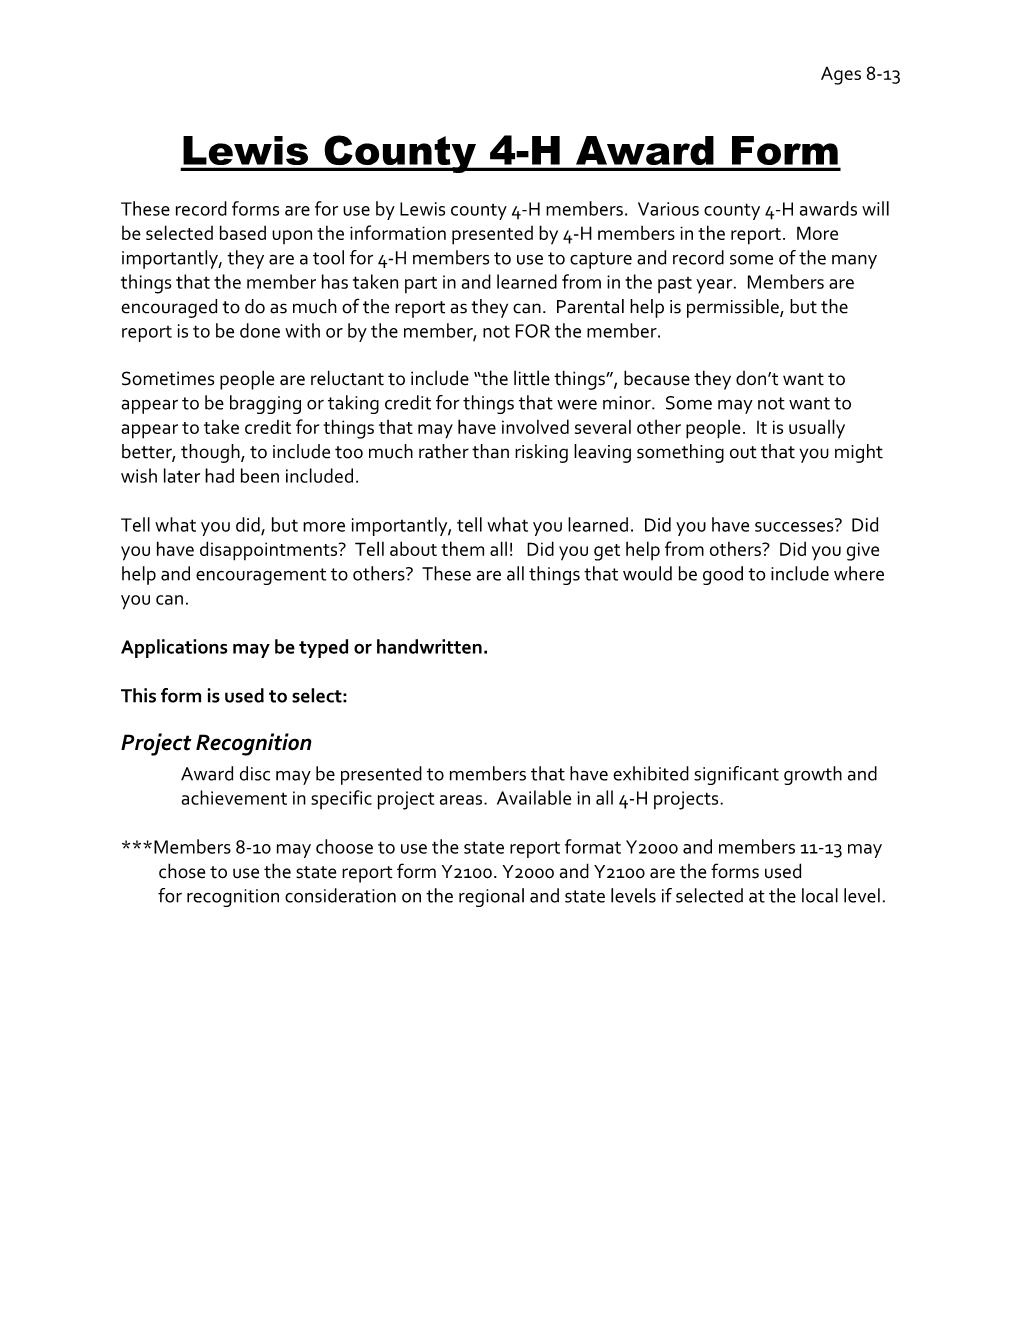 Lewis County 4-H Award Form